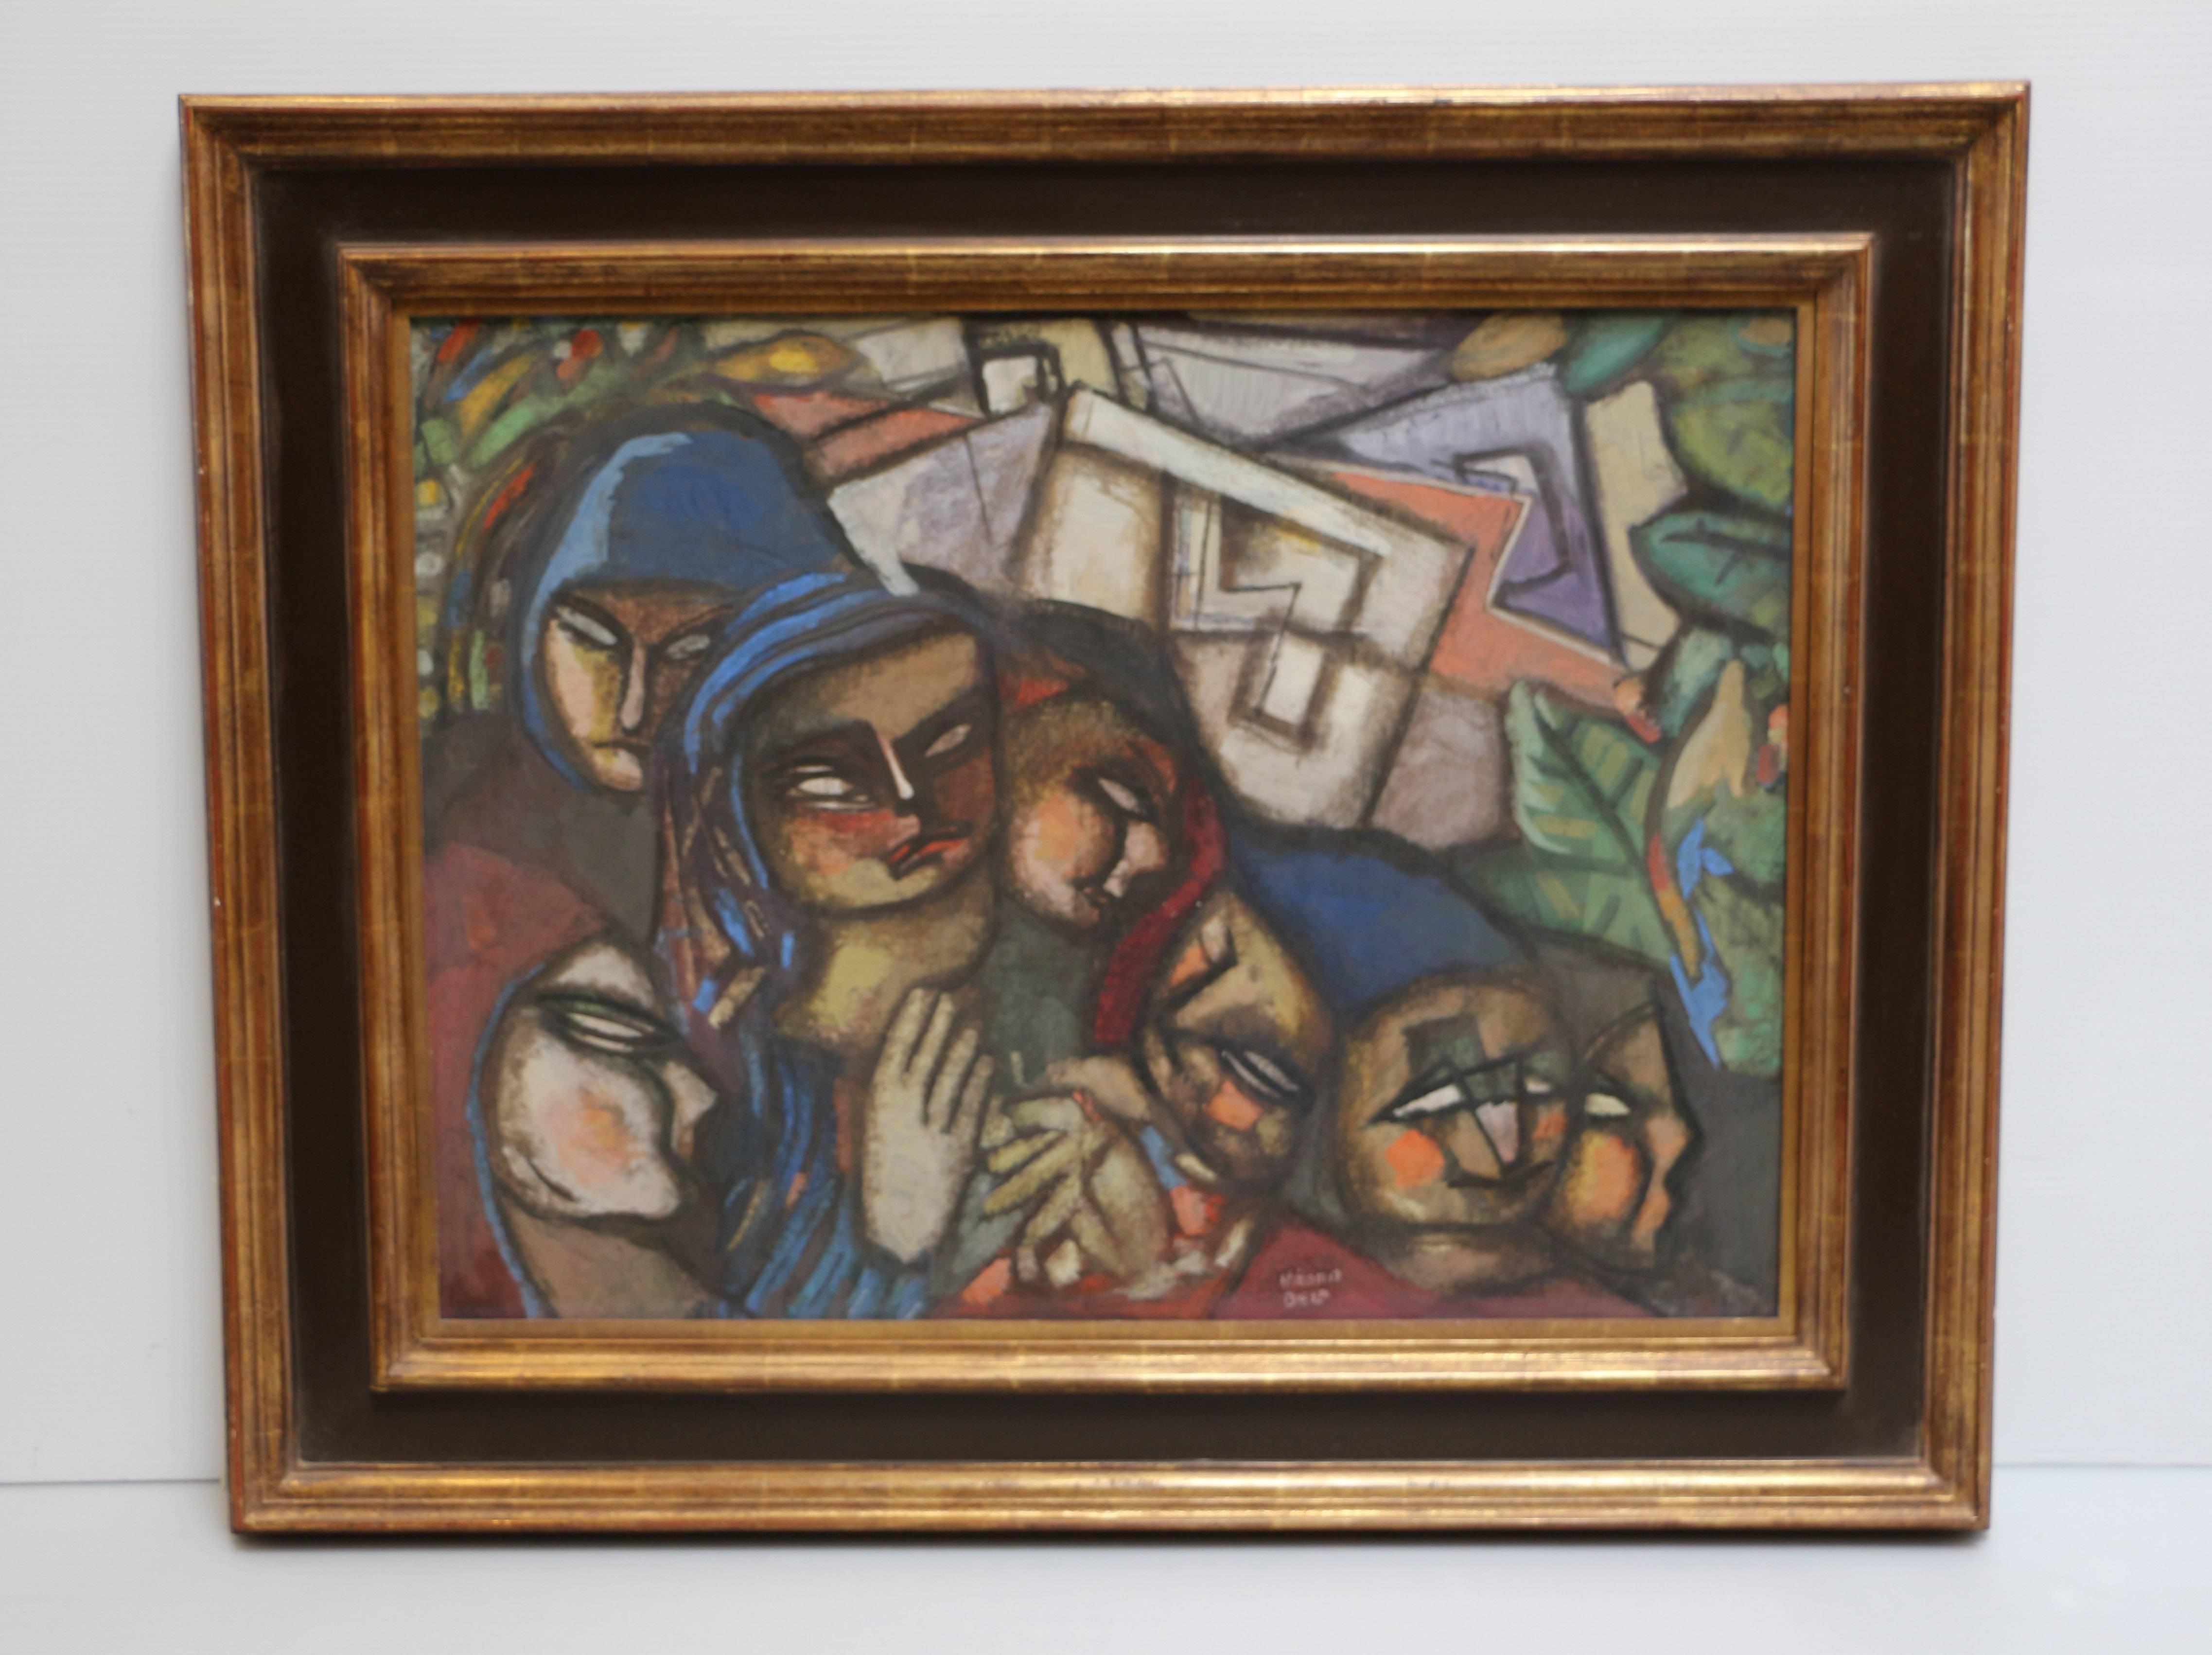 Family, gouache on paper depicting a family of 7 in Cubist style and dark colors - Painting by Bela Kadar